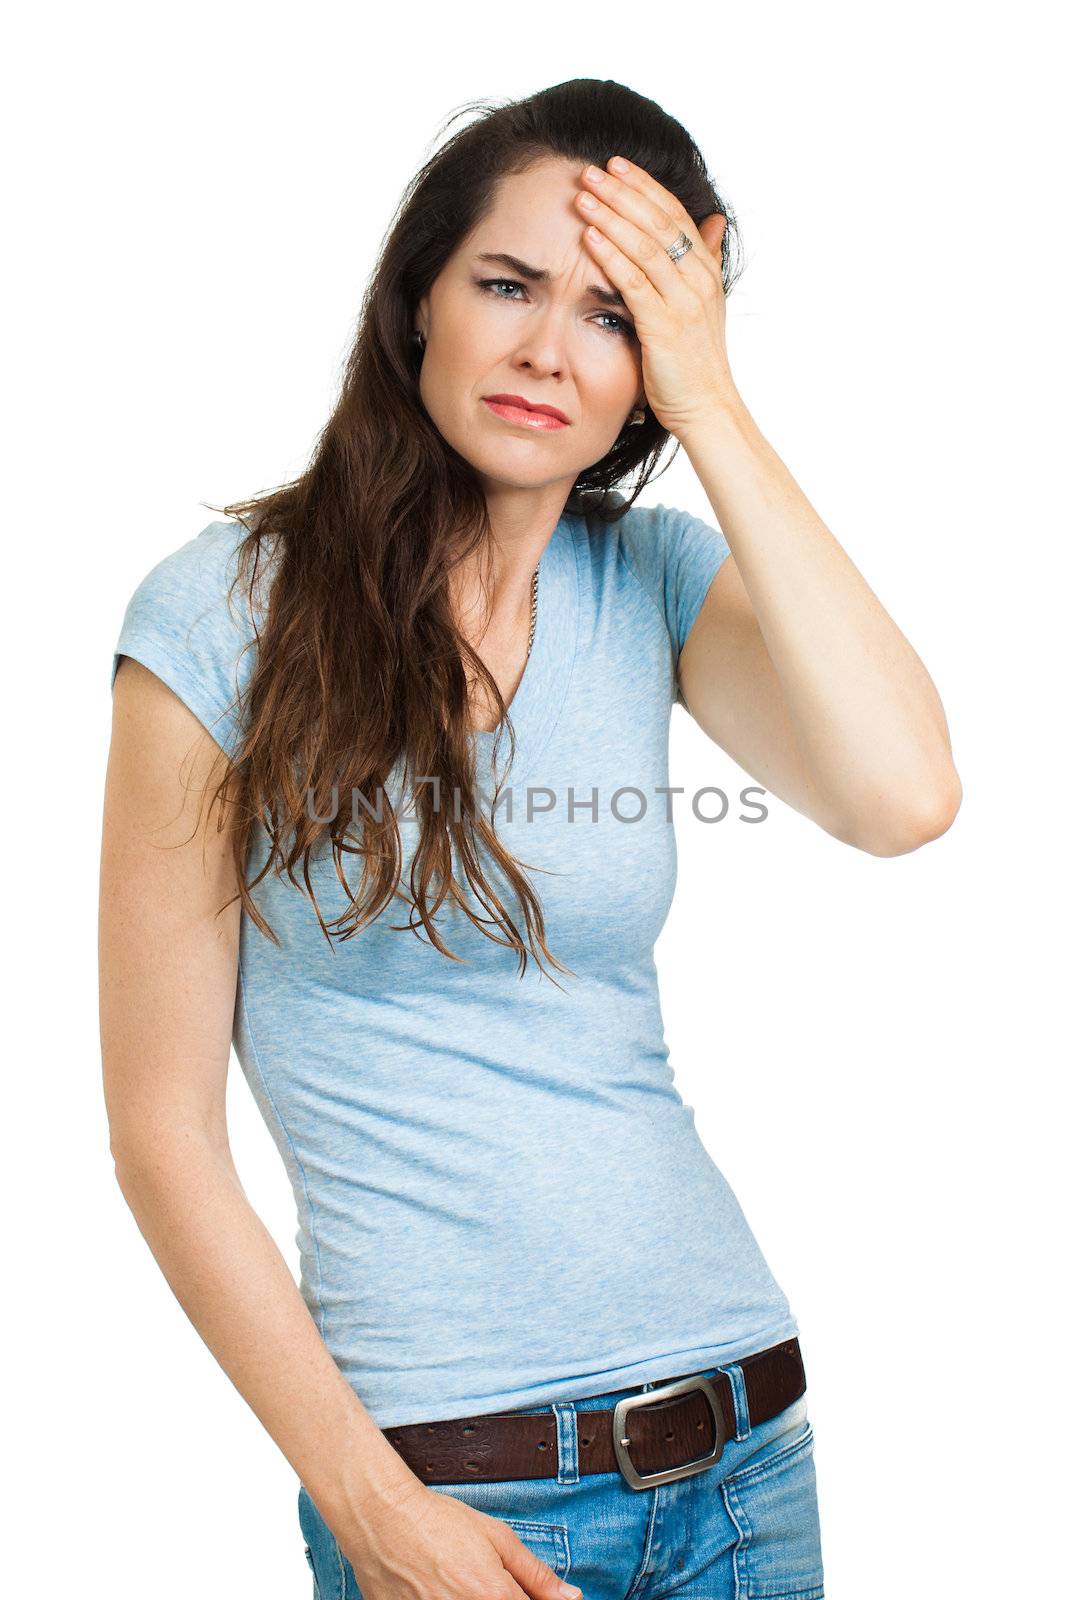 A woman suffering from a bad migraine or headache . Isolated on white.